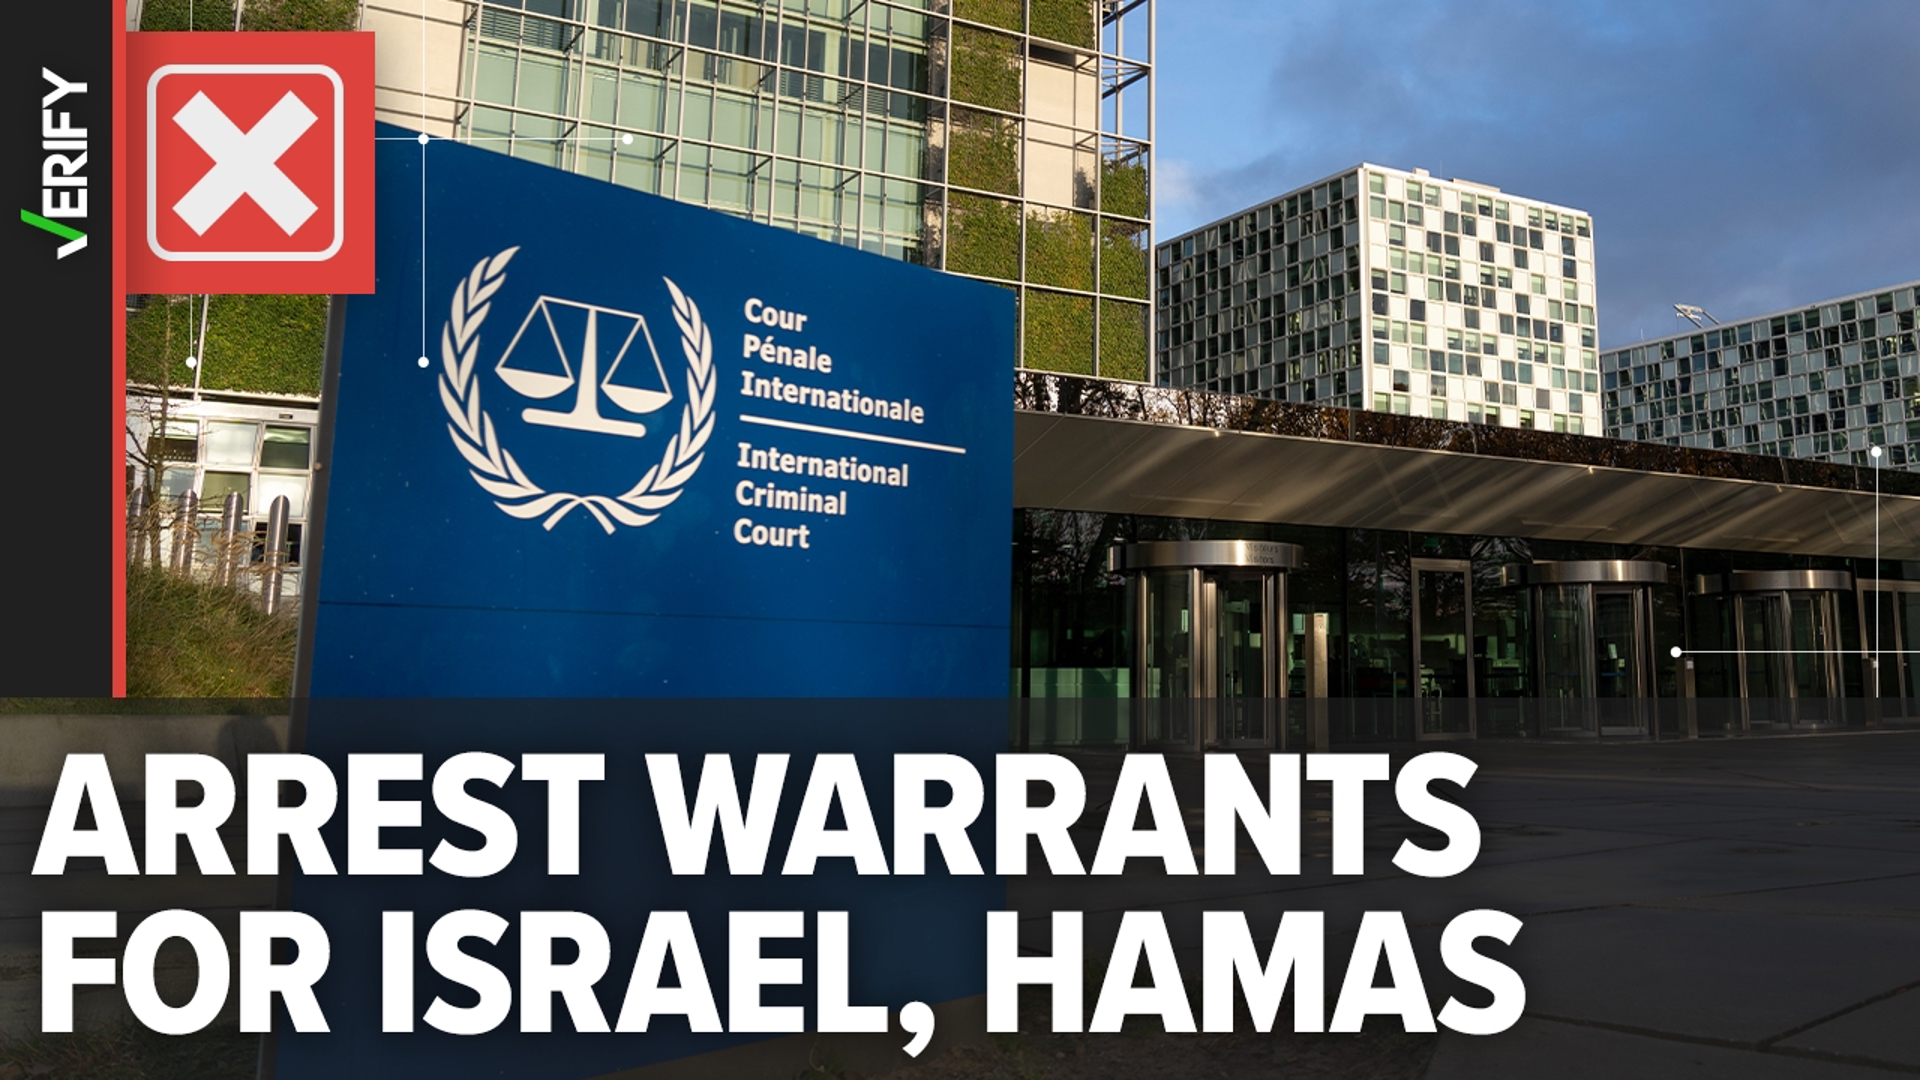 International Criminal Court warrants for war crimes have been requested but not yet granted for leaders of Israel, Hamas.